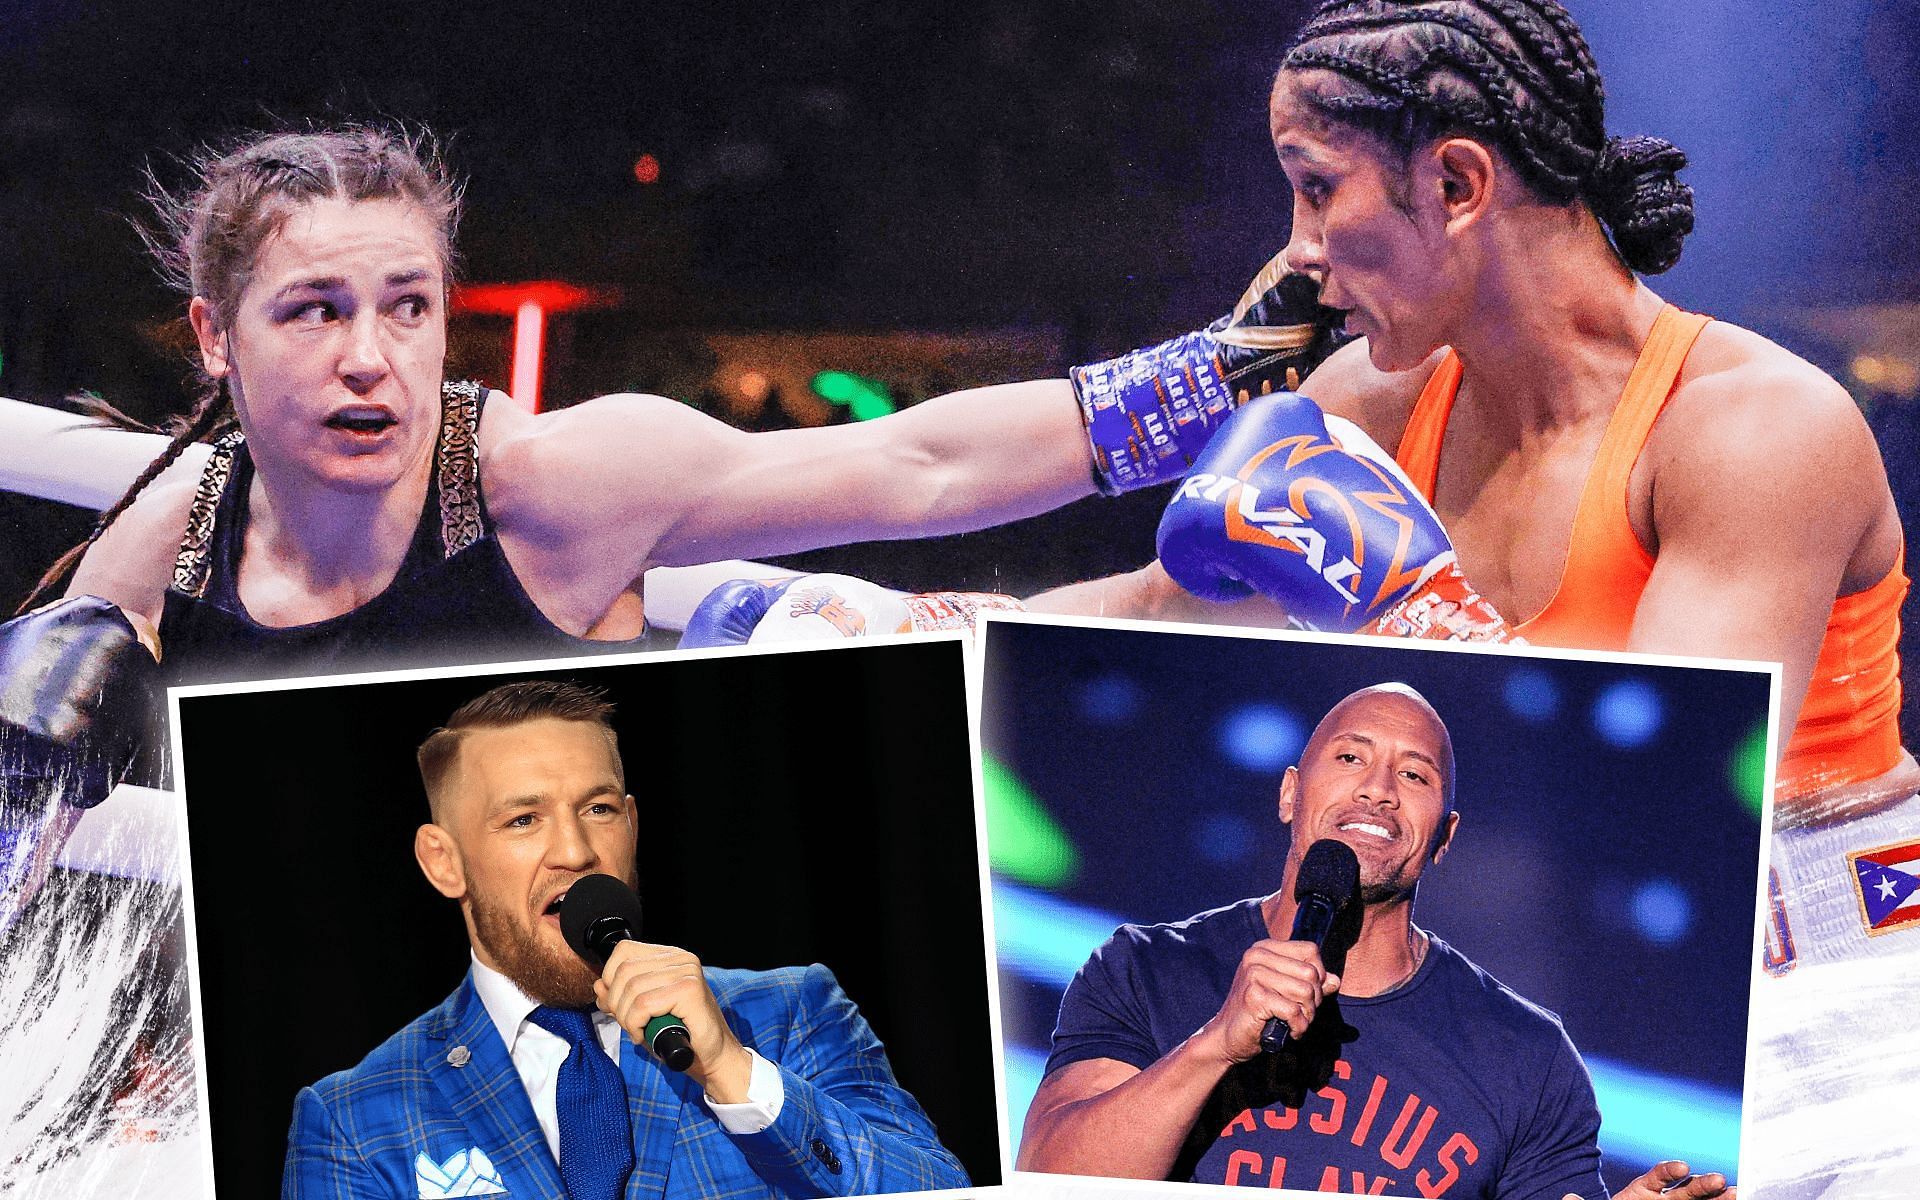 Conor McGregor (bottom left), The Rock (bottom right), and others react to Katie Taylor vs. Amanda Serrano (top)